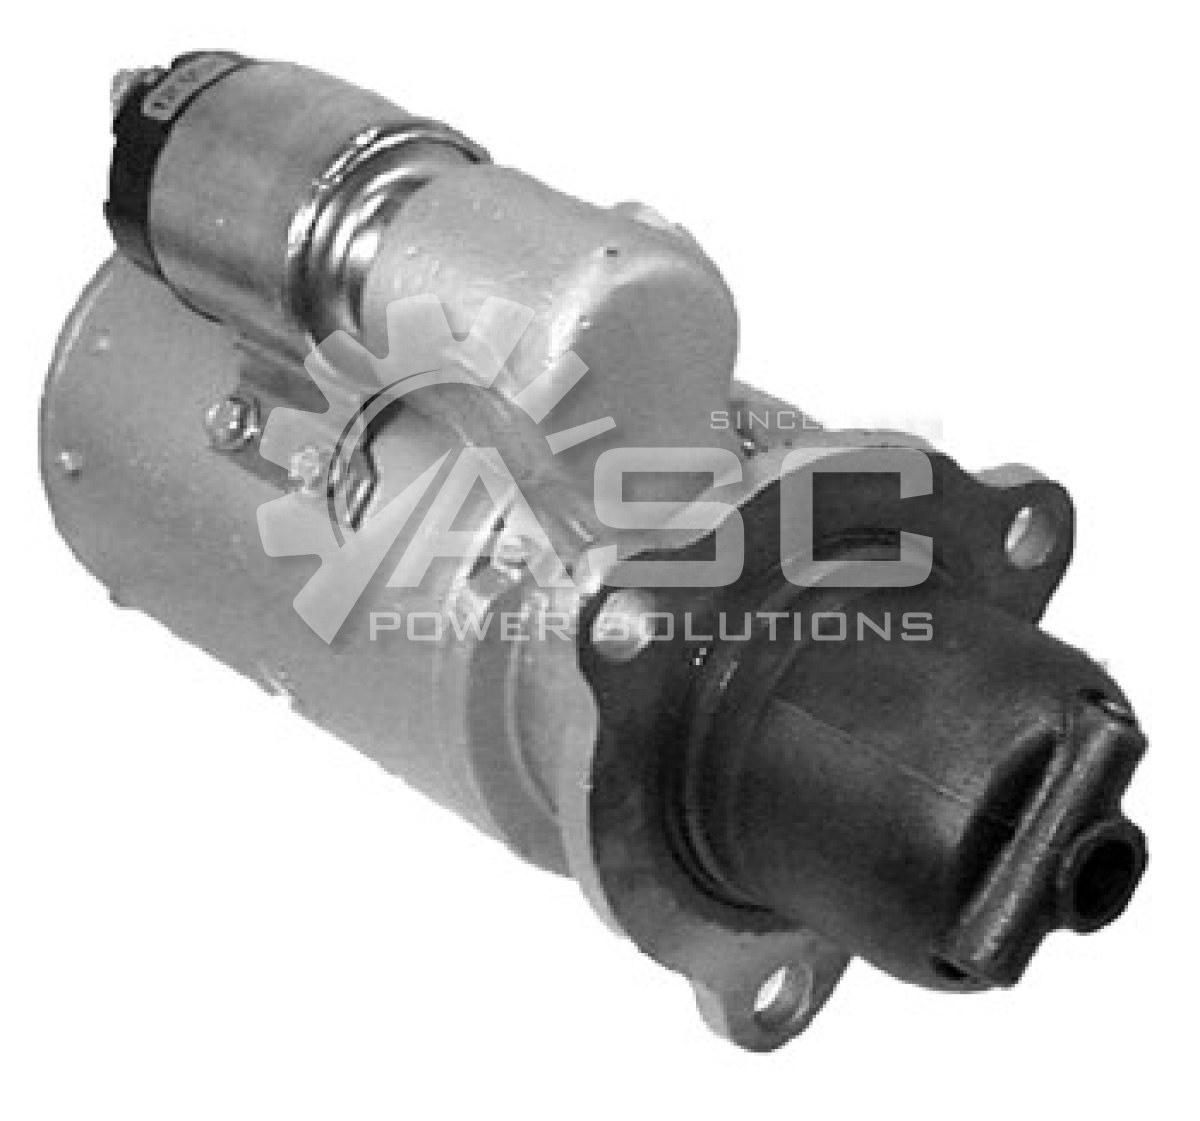 S122571_REMAN ASC POWER SOLUTIONS DELCO STARTER MOTOR FOR CLARK AND CATERPILLAR 30MT EXTERNALLY ROTATABLE 12V 12 TOOTH CLOCKWISE ROTATION DIRECT DRIVE